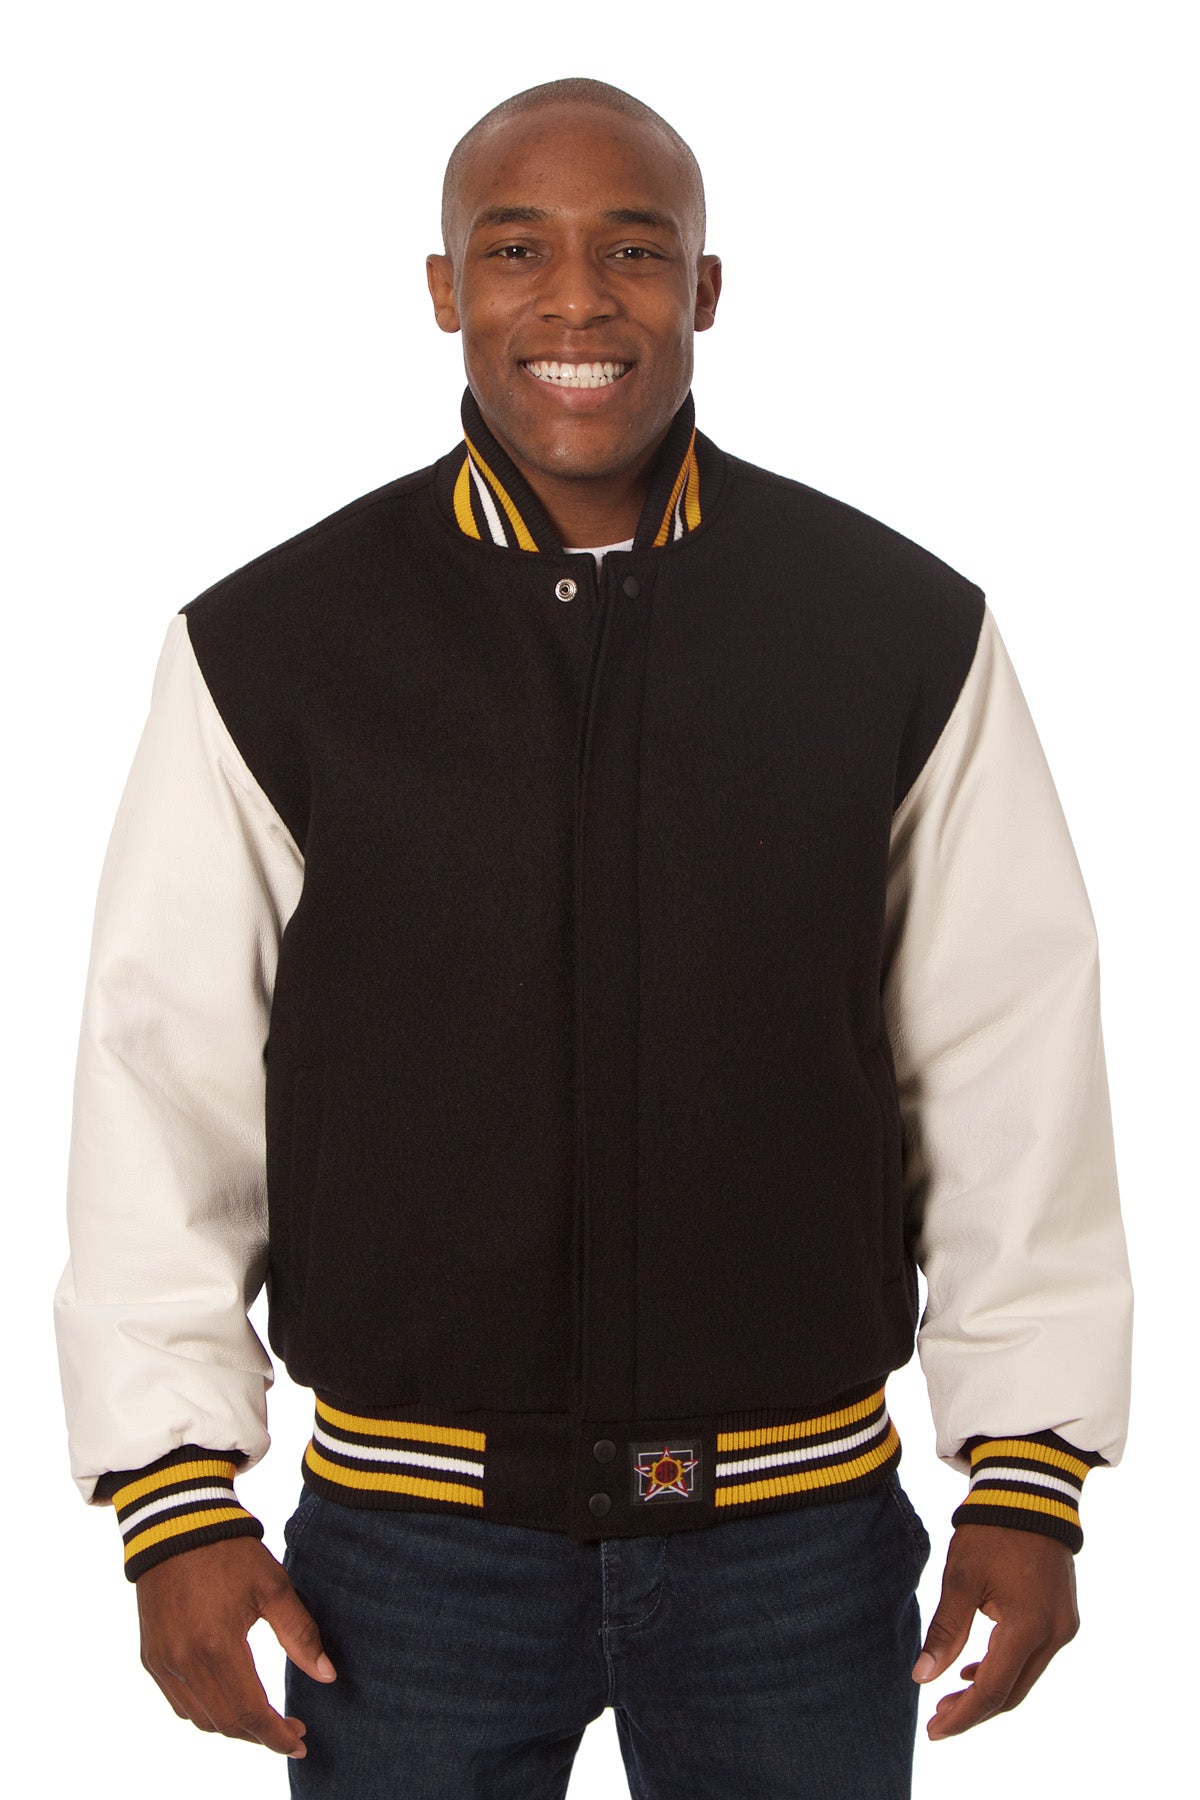 Wool and Leather Varsity Jacket in Black and White